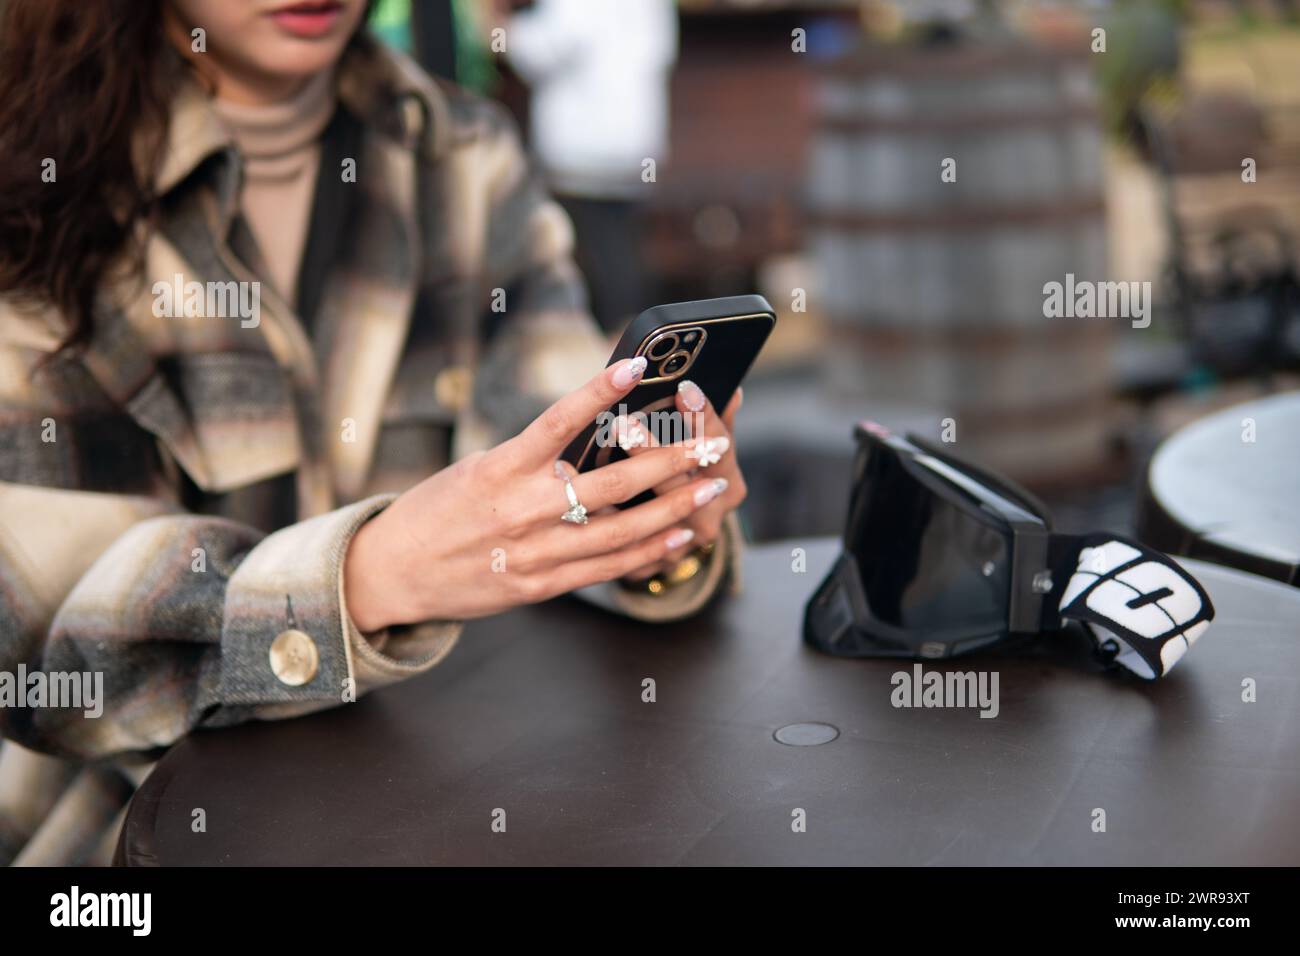 Close-up of a Latina woman's hands holding a smartphone, with motocross goggles on the table, at an outdoor cafe setting Stock Photo